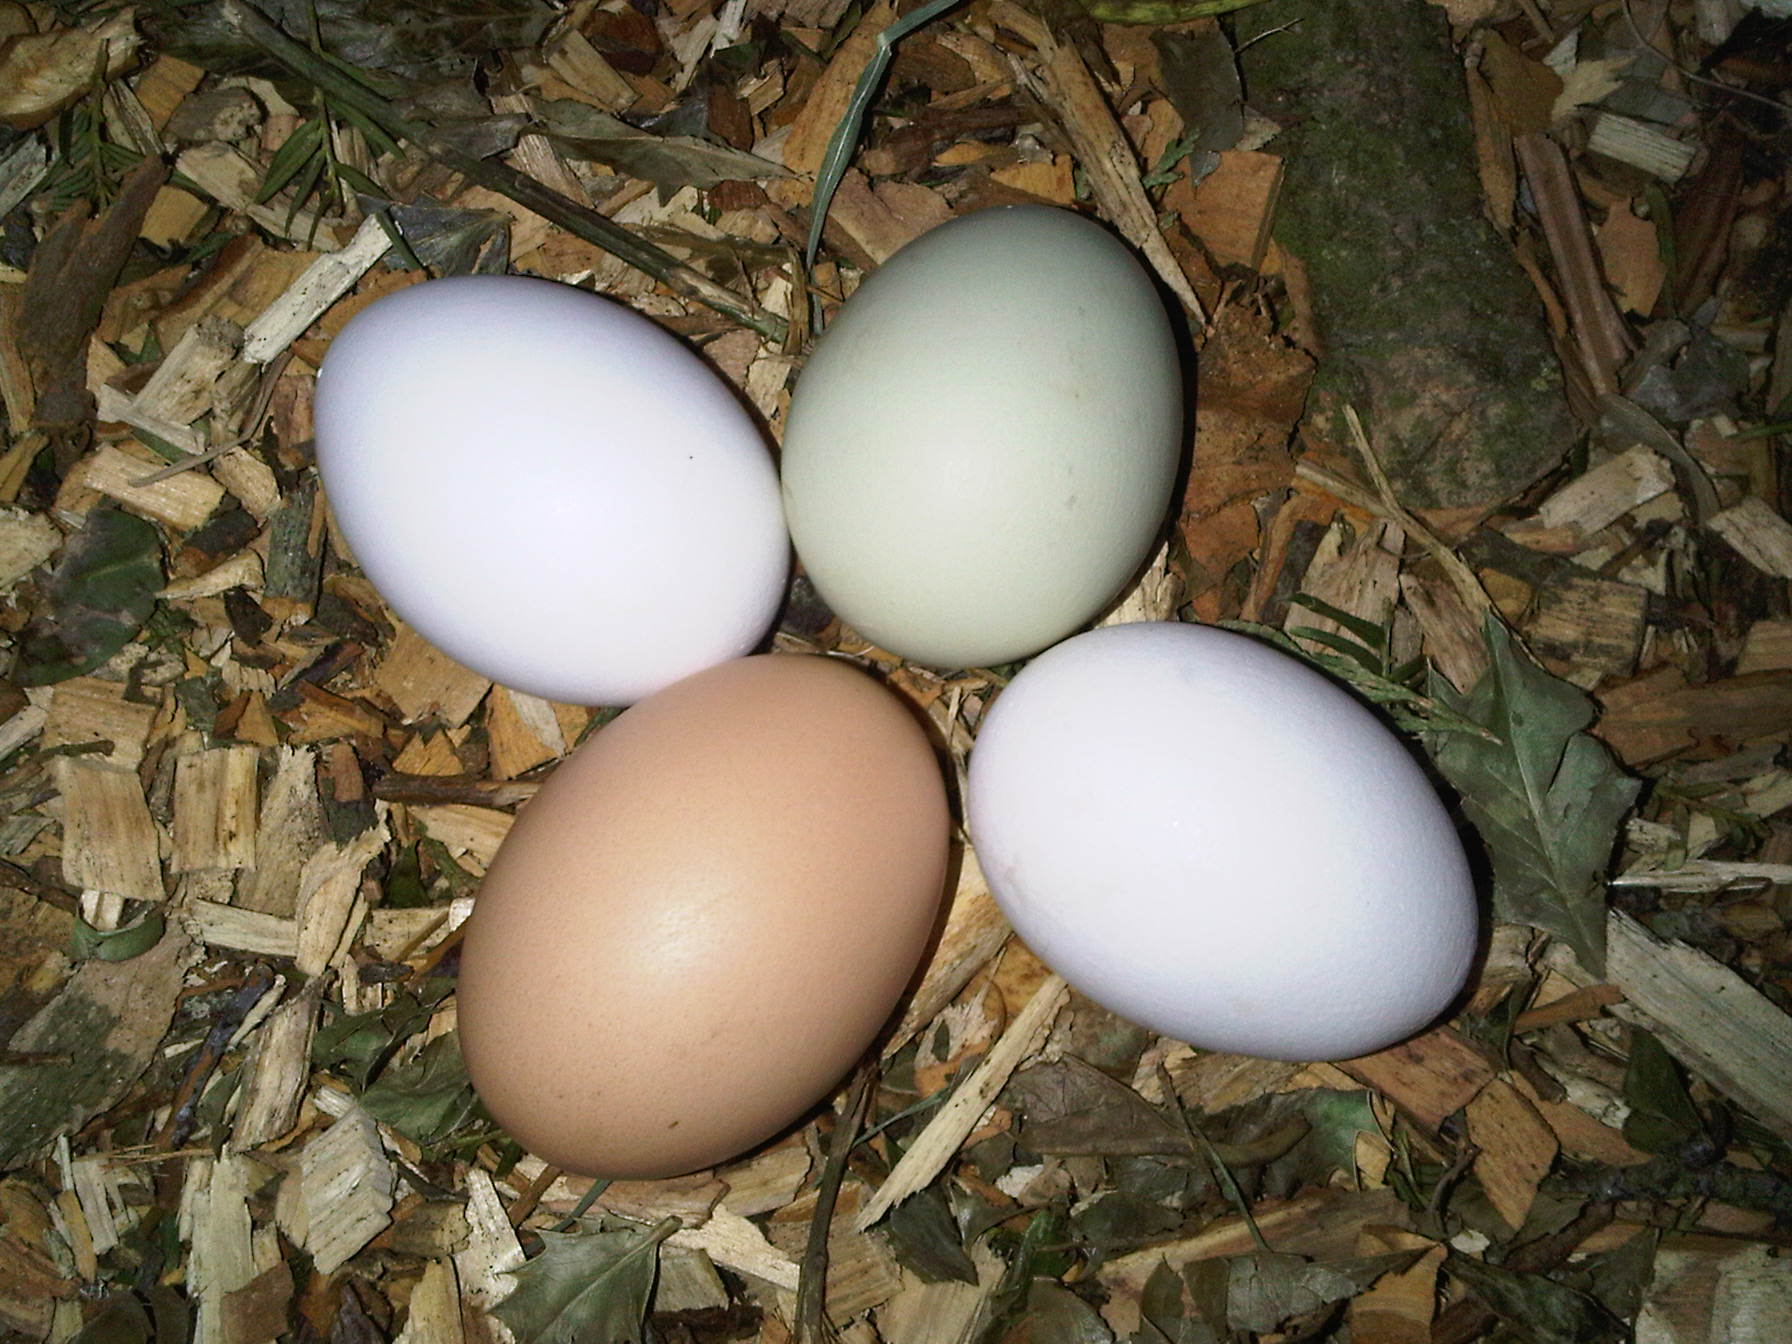 “Cracking the Benefits of Free-Range Eggs: Nutrition, Welfare, and Sustainability”